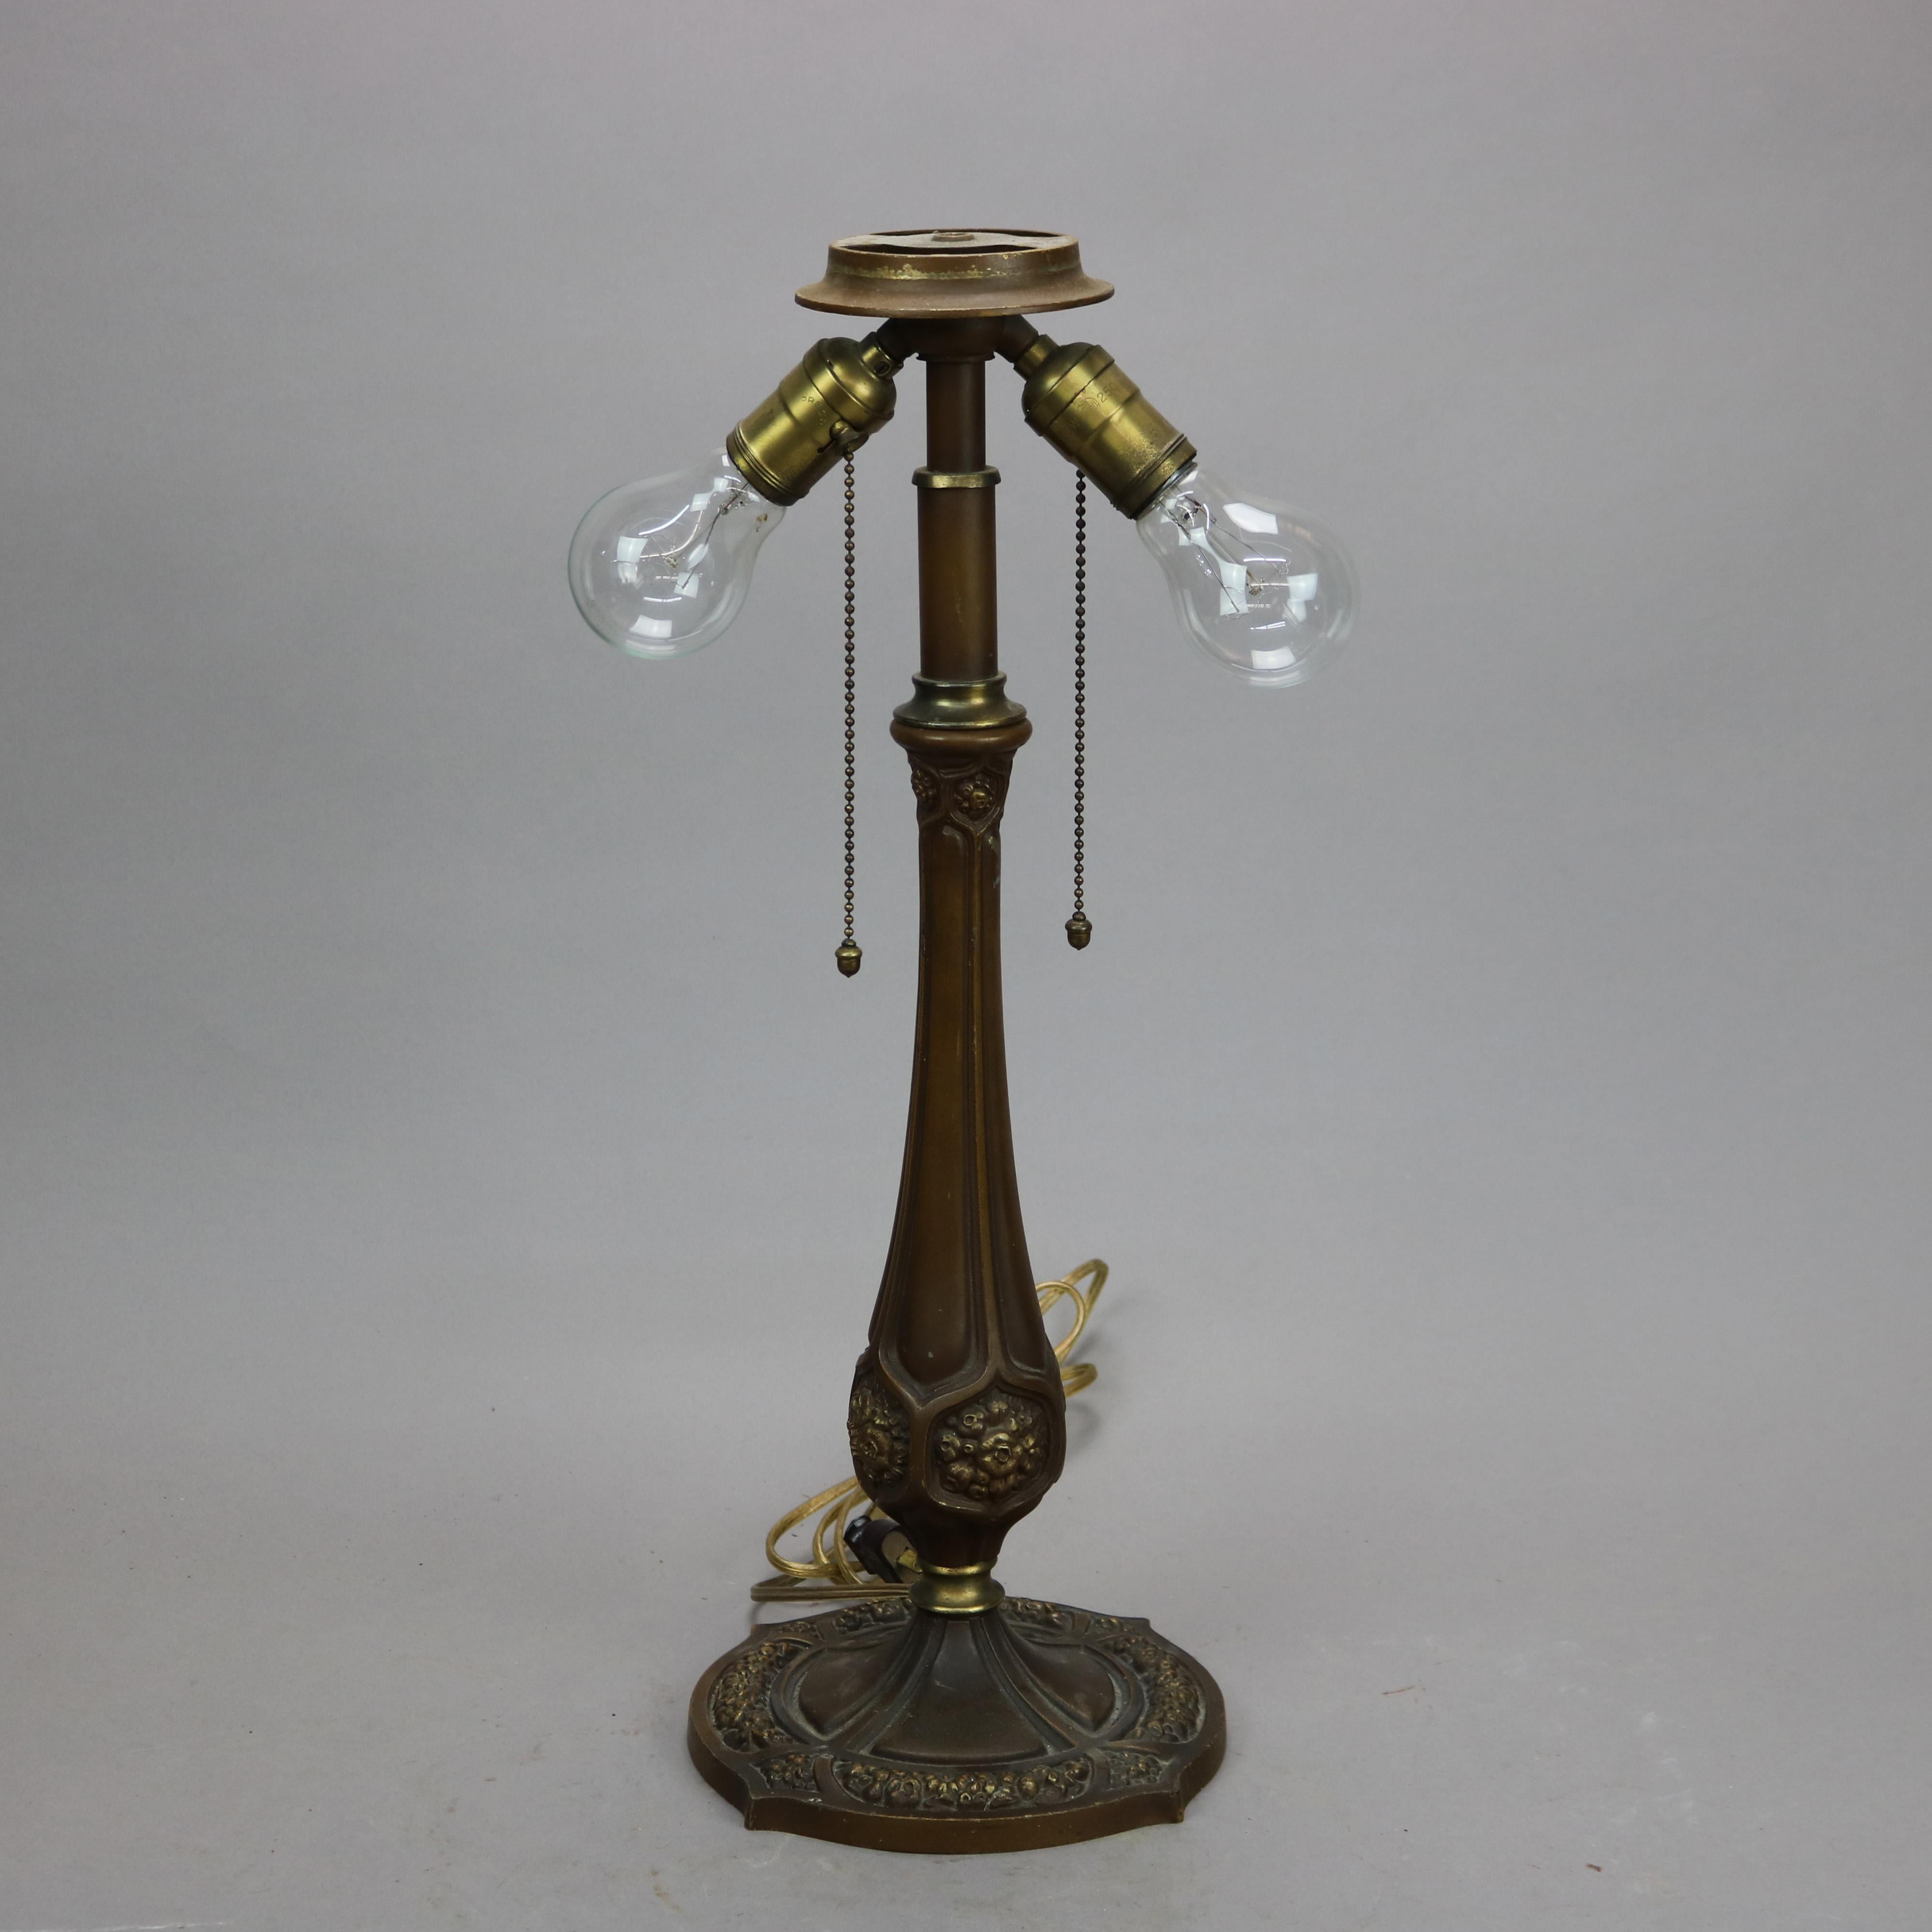 Hand-Painted Antique Arts & Crafts Pittsburgh Reverse Painted Table Lamp circa 1920